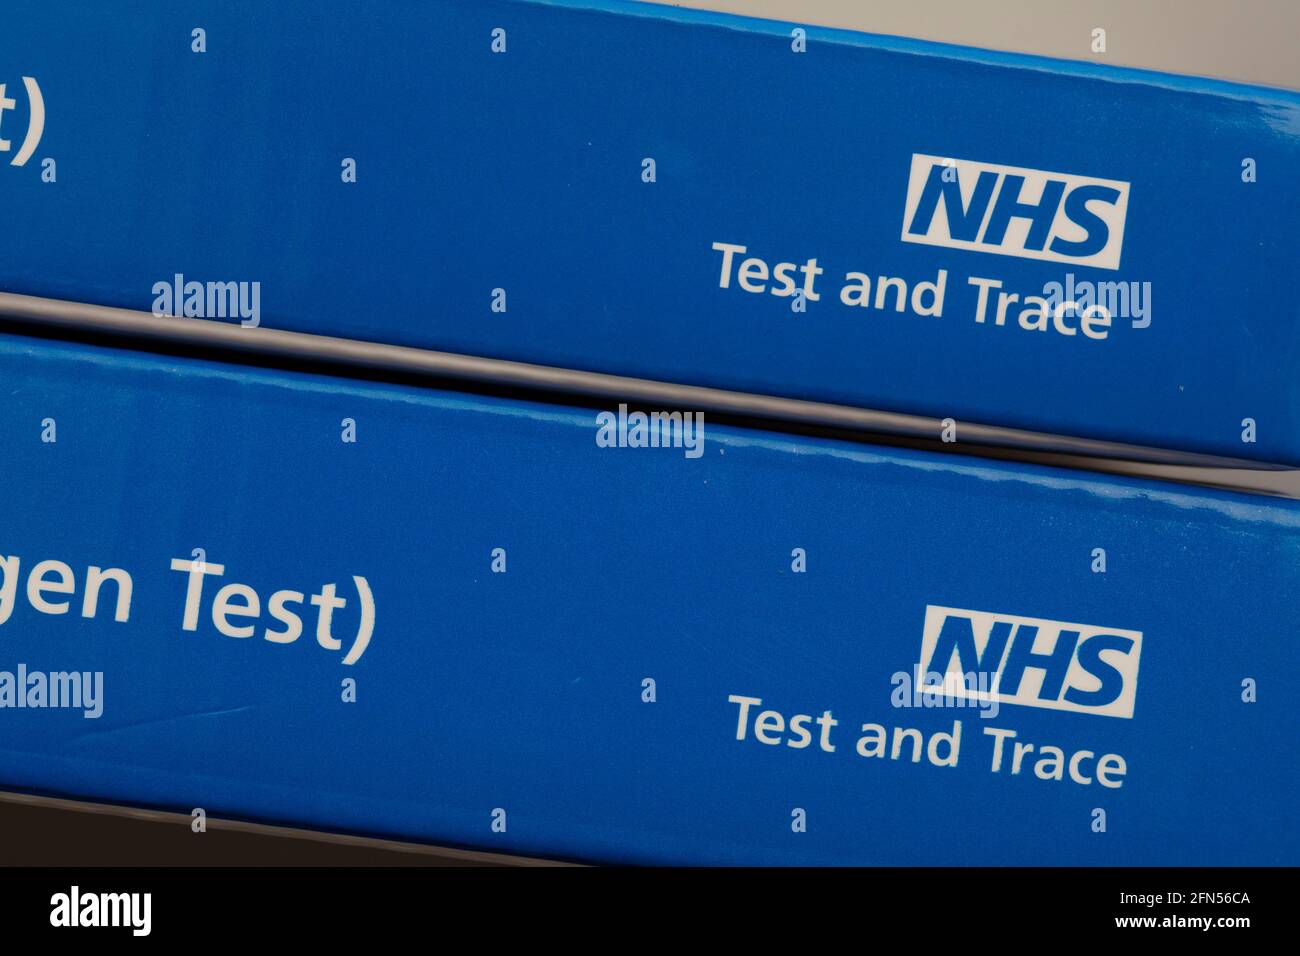 LONDON, UK - May 2021: NHS Test and Trace Covid-19 Home Test Kit Stock Photo